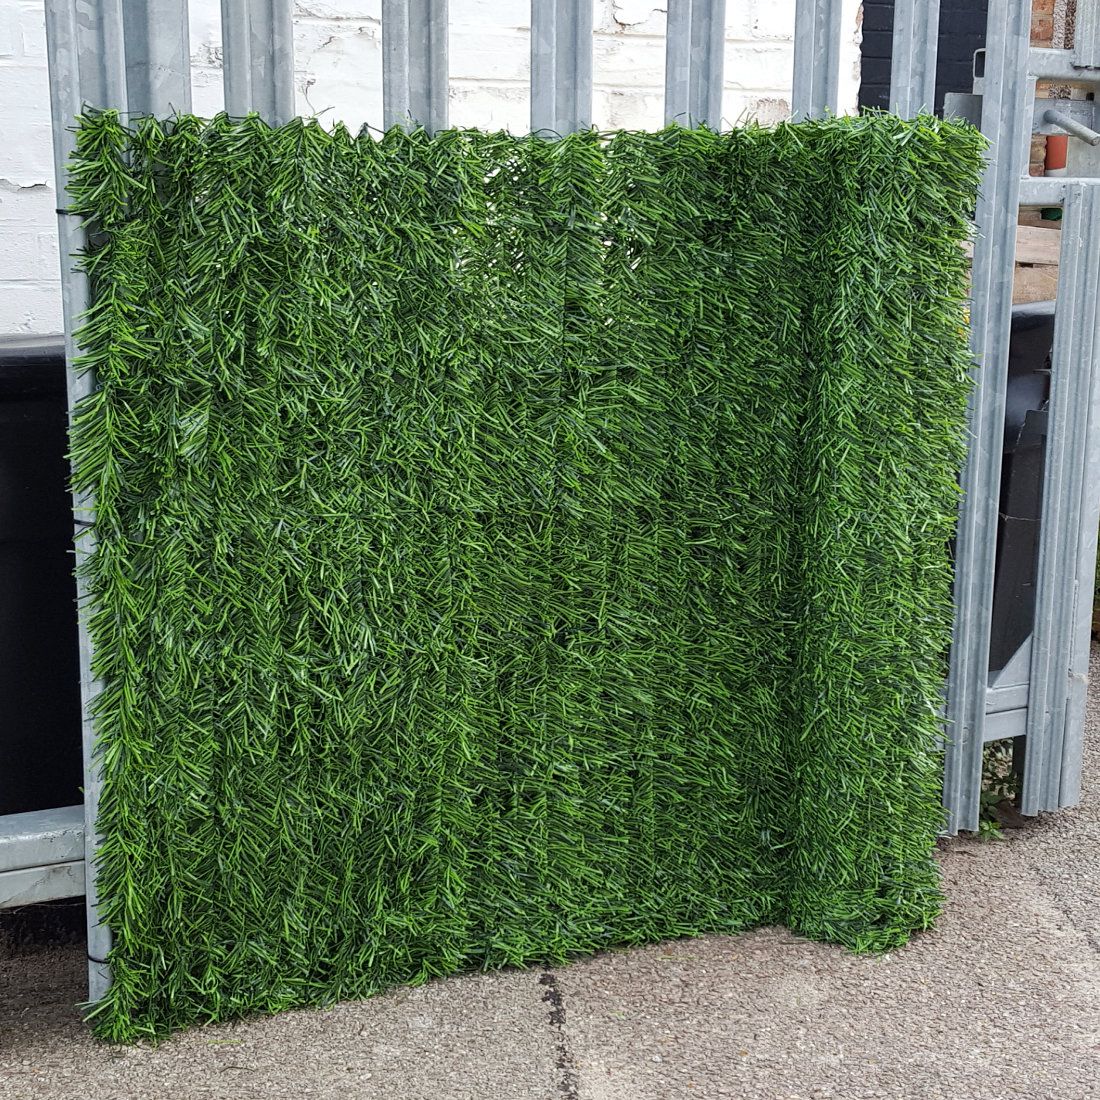 Artificial Conifer Hedge Garden Fence Privacy Screening 1m Tall